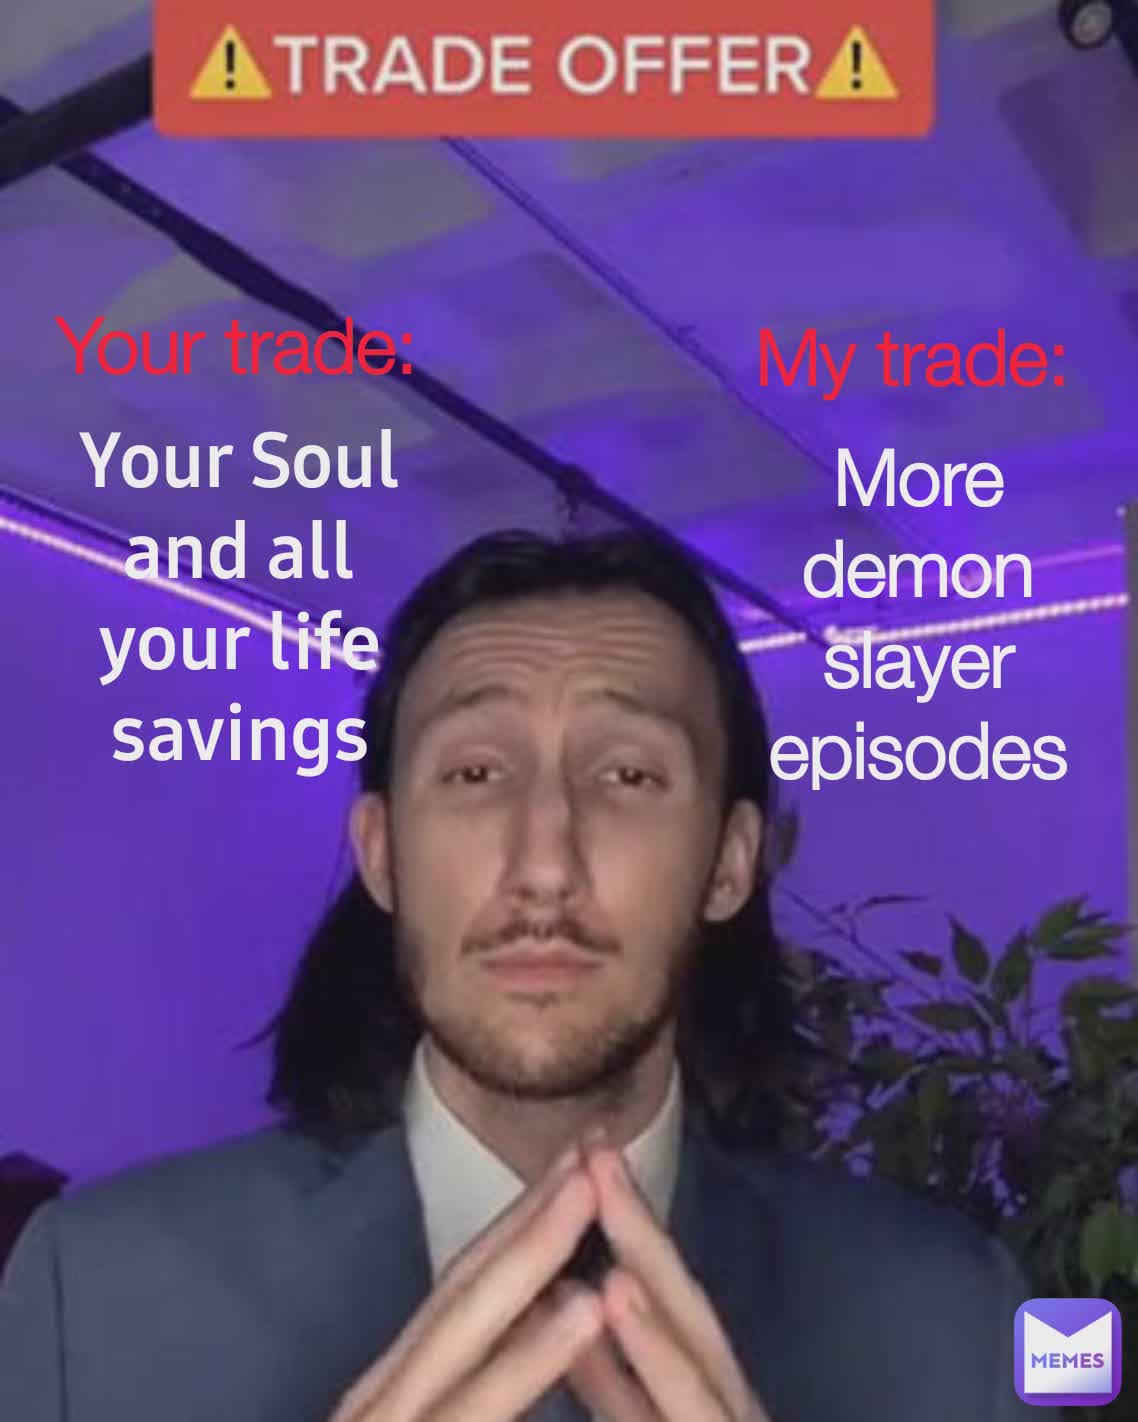 Type Text Your trade: My trade: Your Soul and all your life savings More demon slayer episodes